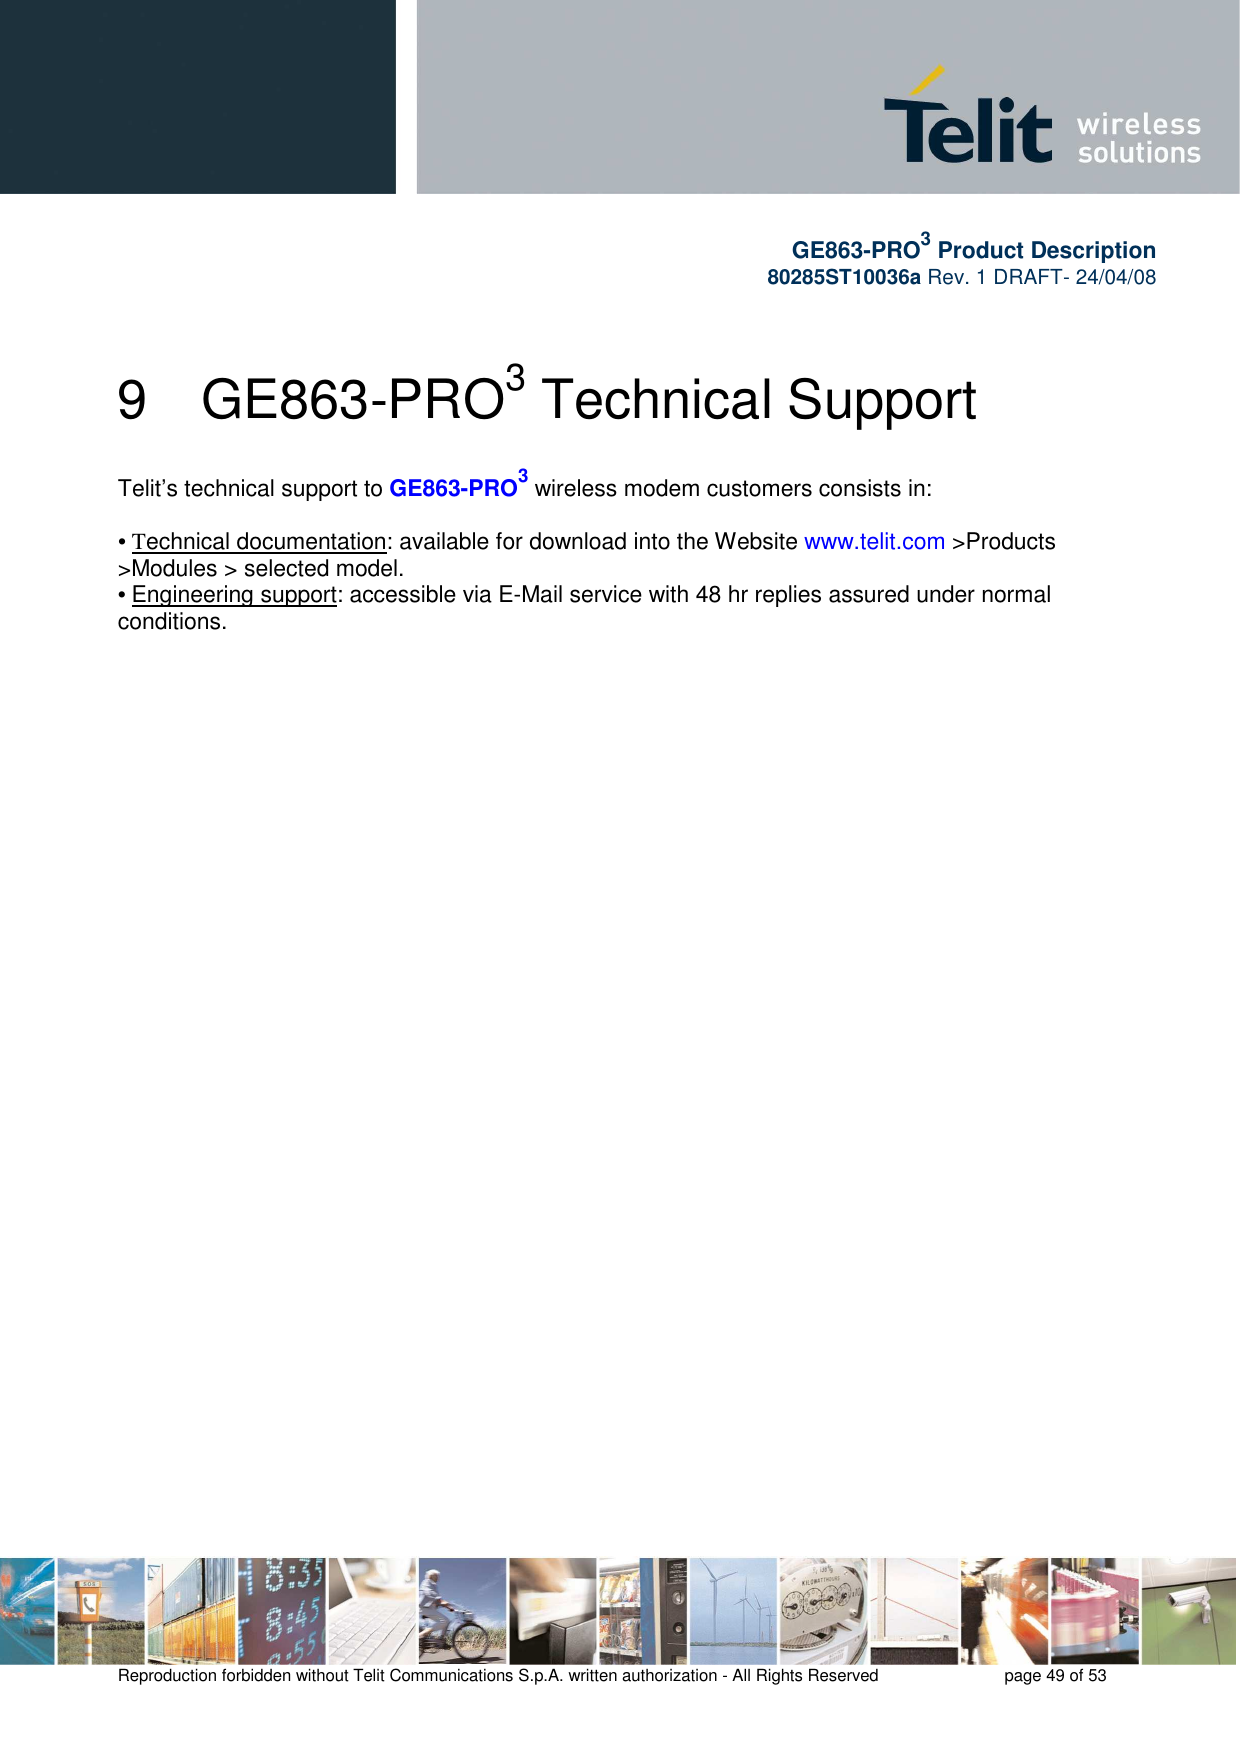       GE863-PRO3 Product Description 80285ST10036a Rev. 1 DRAFT- 24/04/08    Reproduction forbidden without Telit Communications S.p.A. written authorization - All Rights Reserved    page 49 of 53  9  GE863-PRO3 Technical Support Telit’s technical support to GE863-PRO3 wireless modem customers consists in:  • Technical documentation: available for download into the Website www.telit.com &gt;Products &gt;Modules &gt; selected model. • Engineering support: accessible via E-Mail service with 48 hr replies assured under normal conditions.  